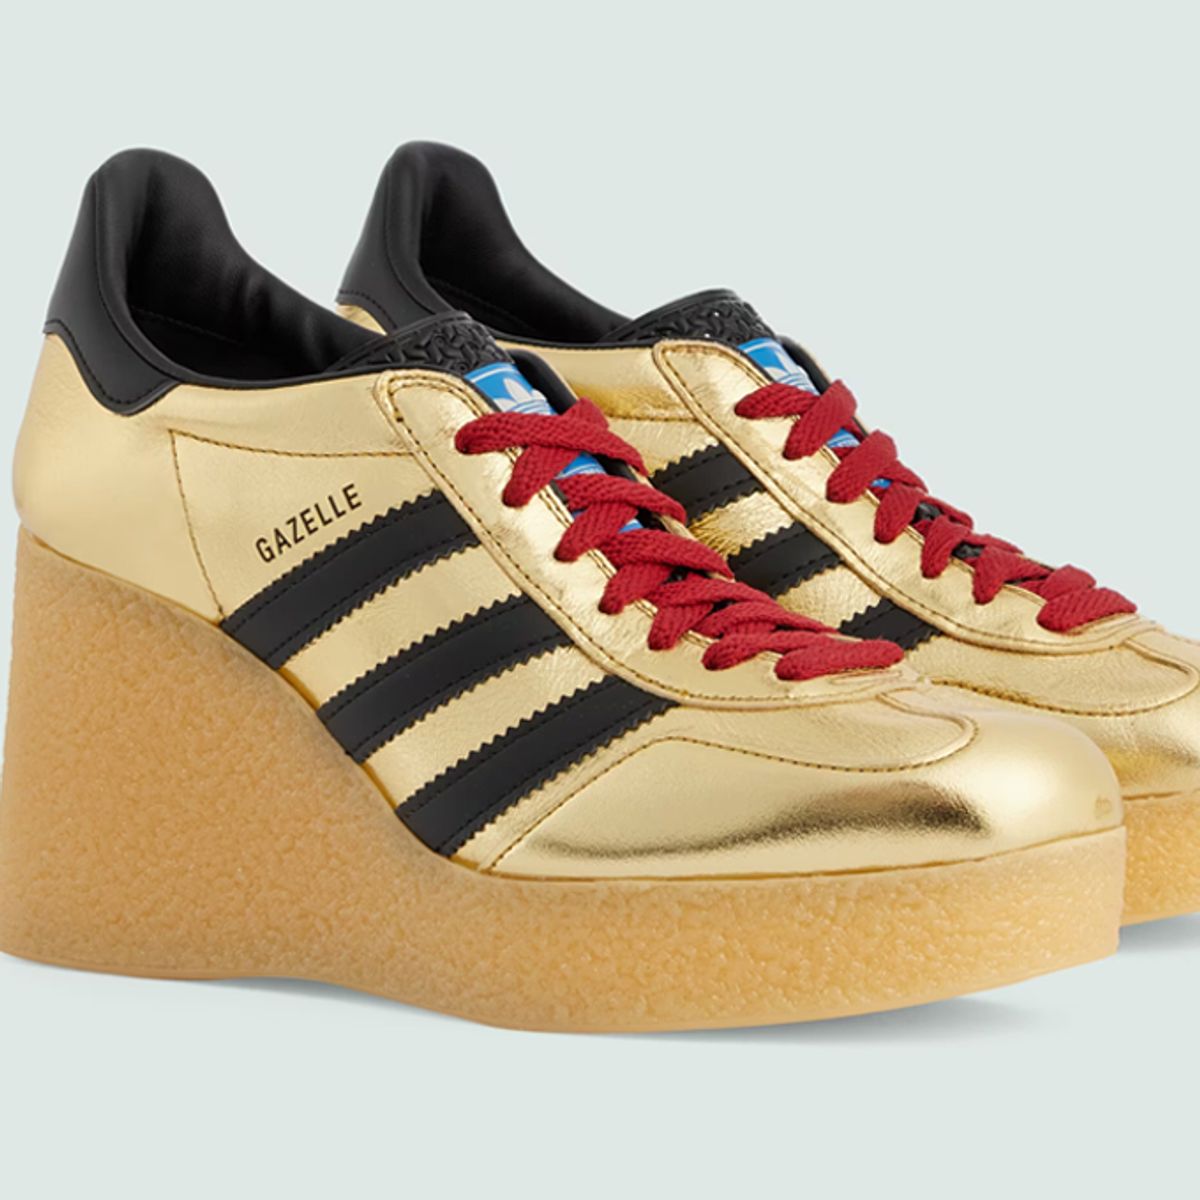 adidas and Go Extra With the Wedge Gazelle Sneaker Freaker